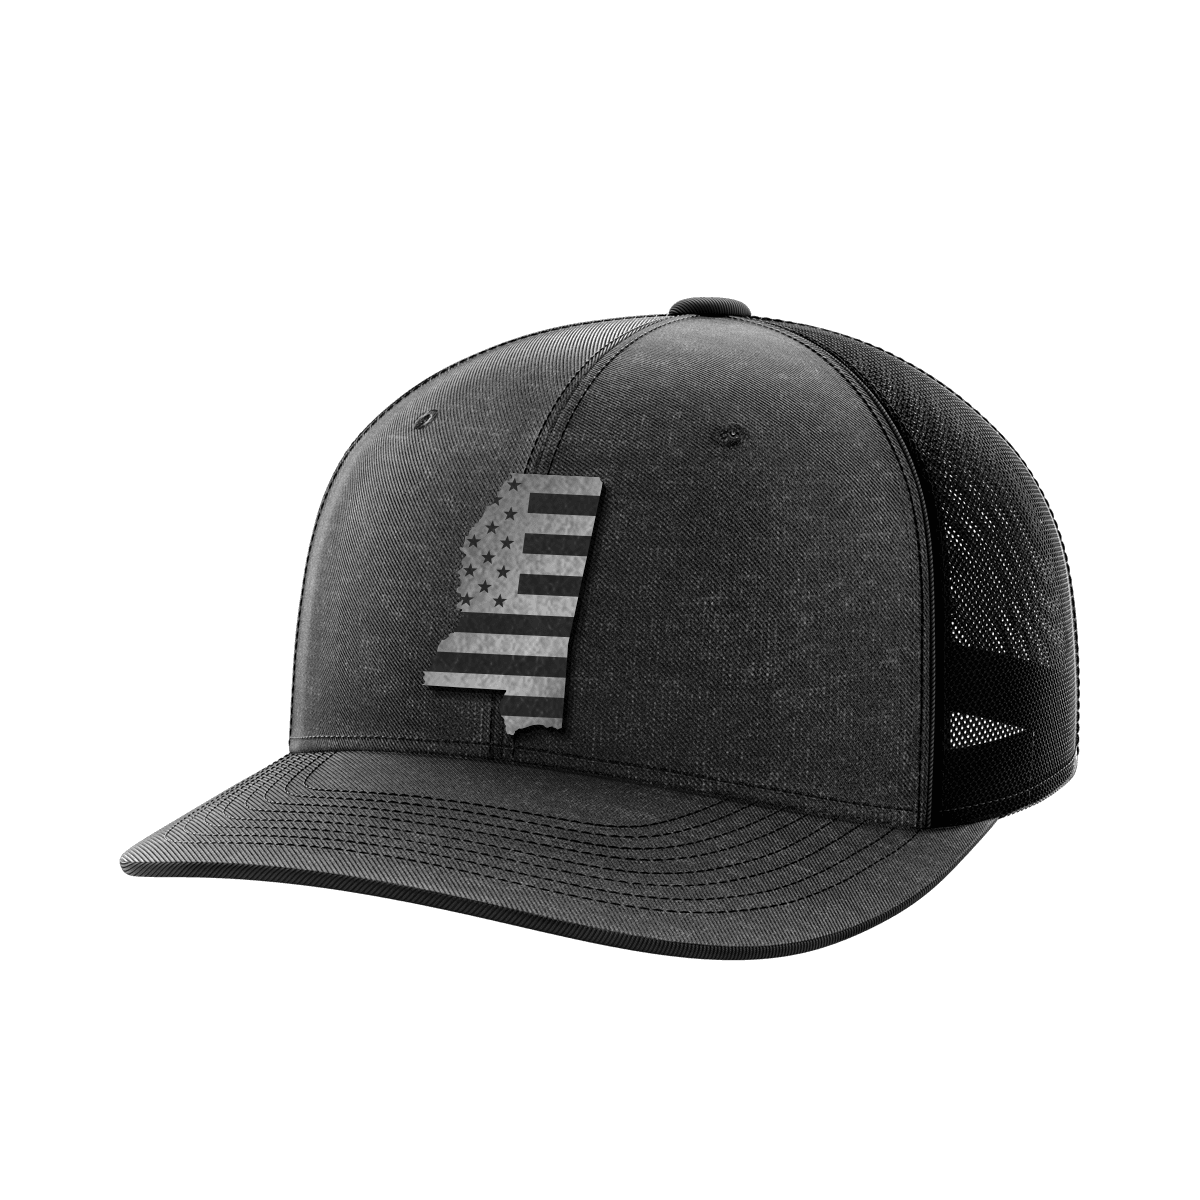 Mississippi United Collection (black leather) - Greater Half